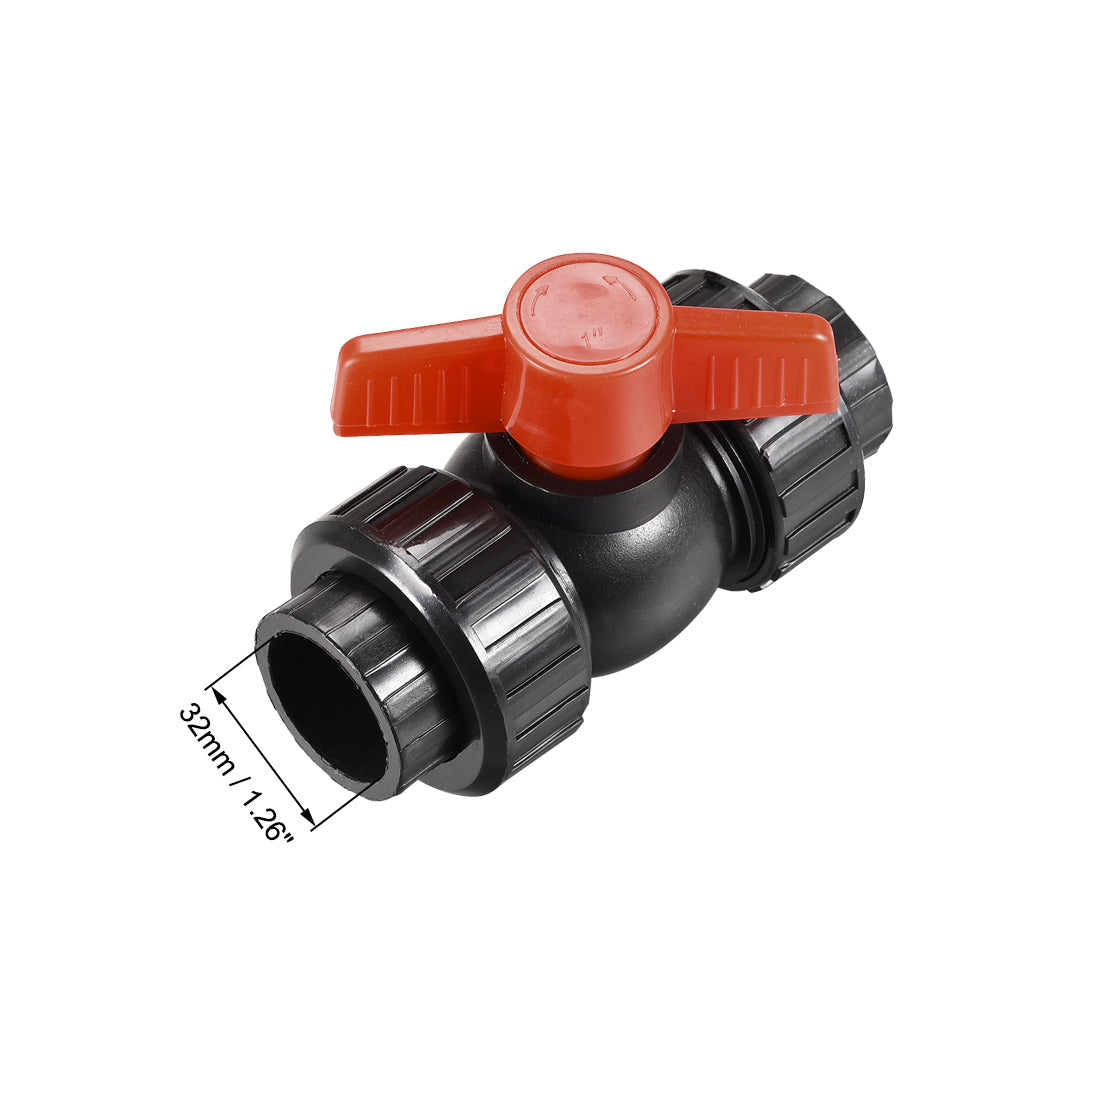 Uxcell Uxcell Double Union Ball Valve, 48.5mm Inner Diameter, Socket Type, for Control Water Flow, PE Black Red